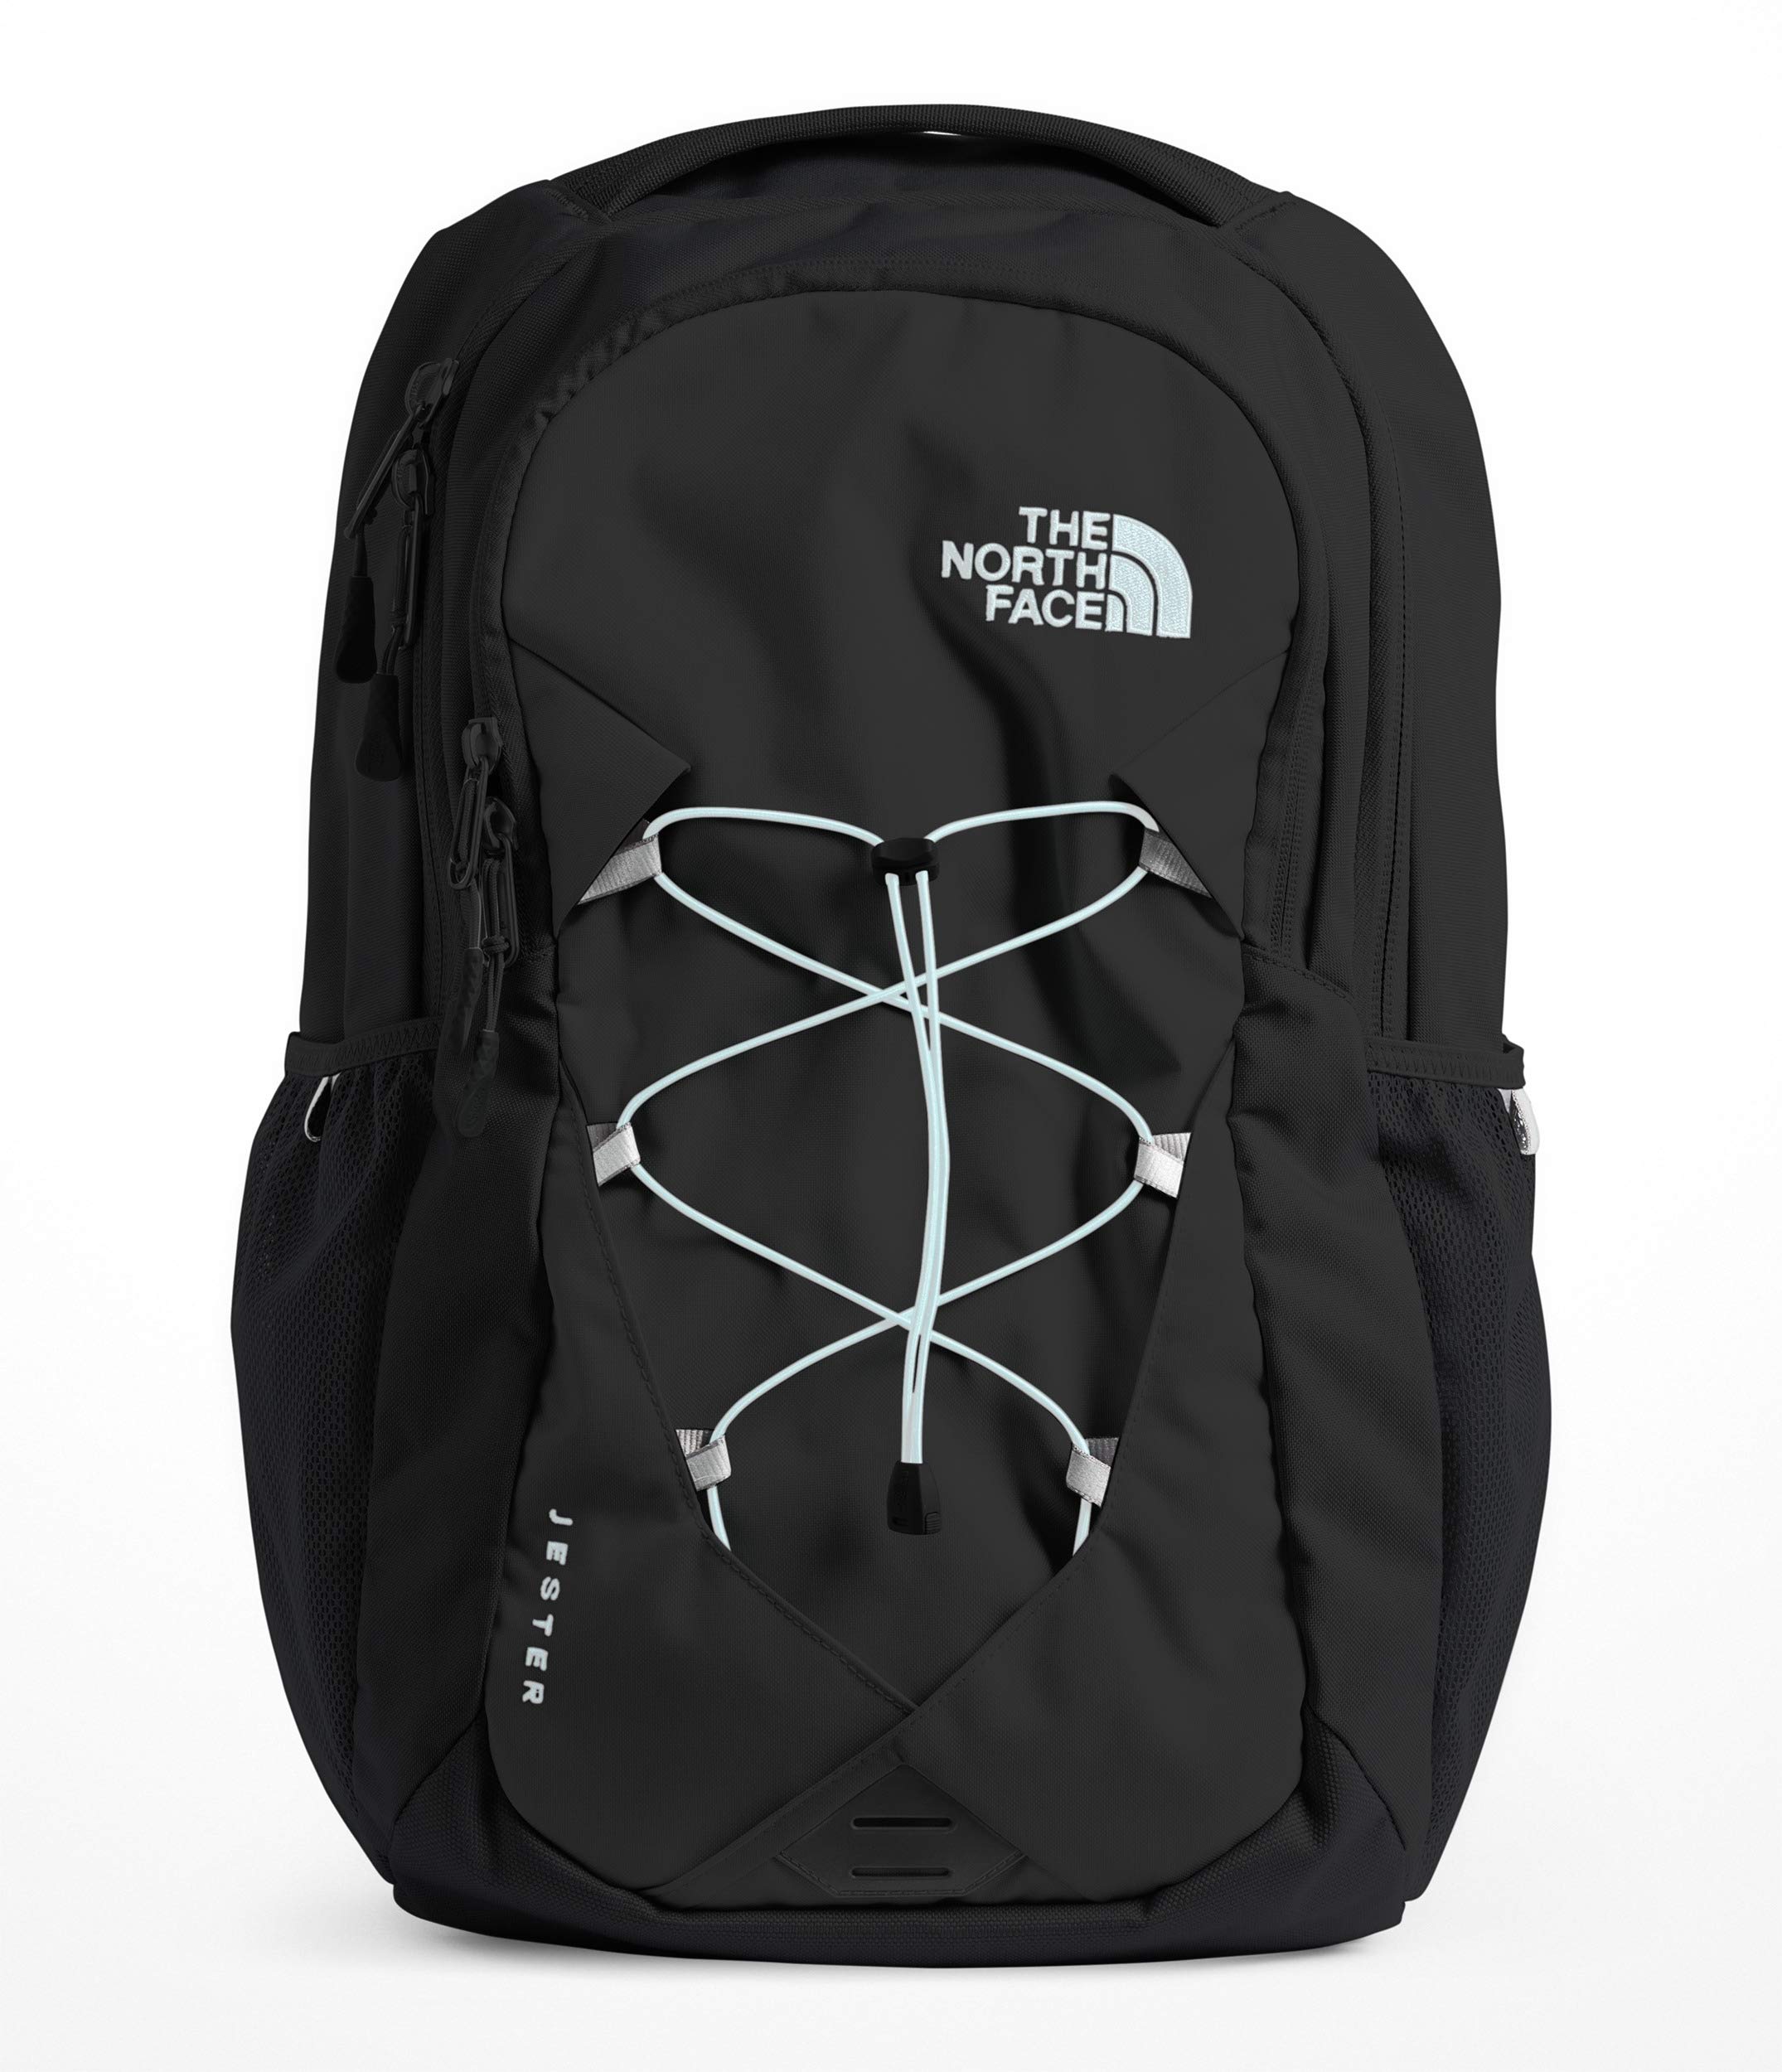 the north face jester backpack blue